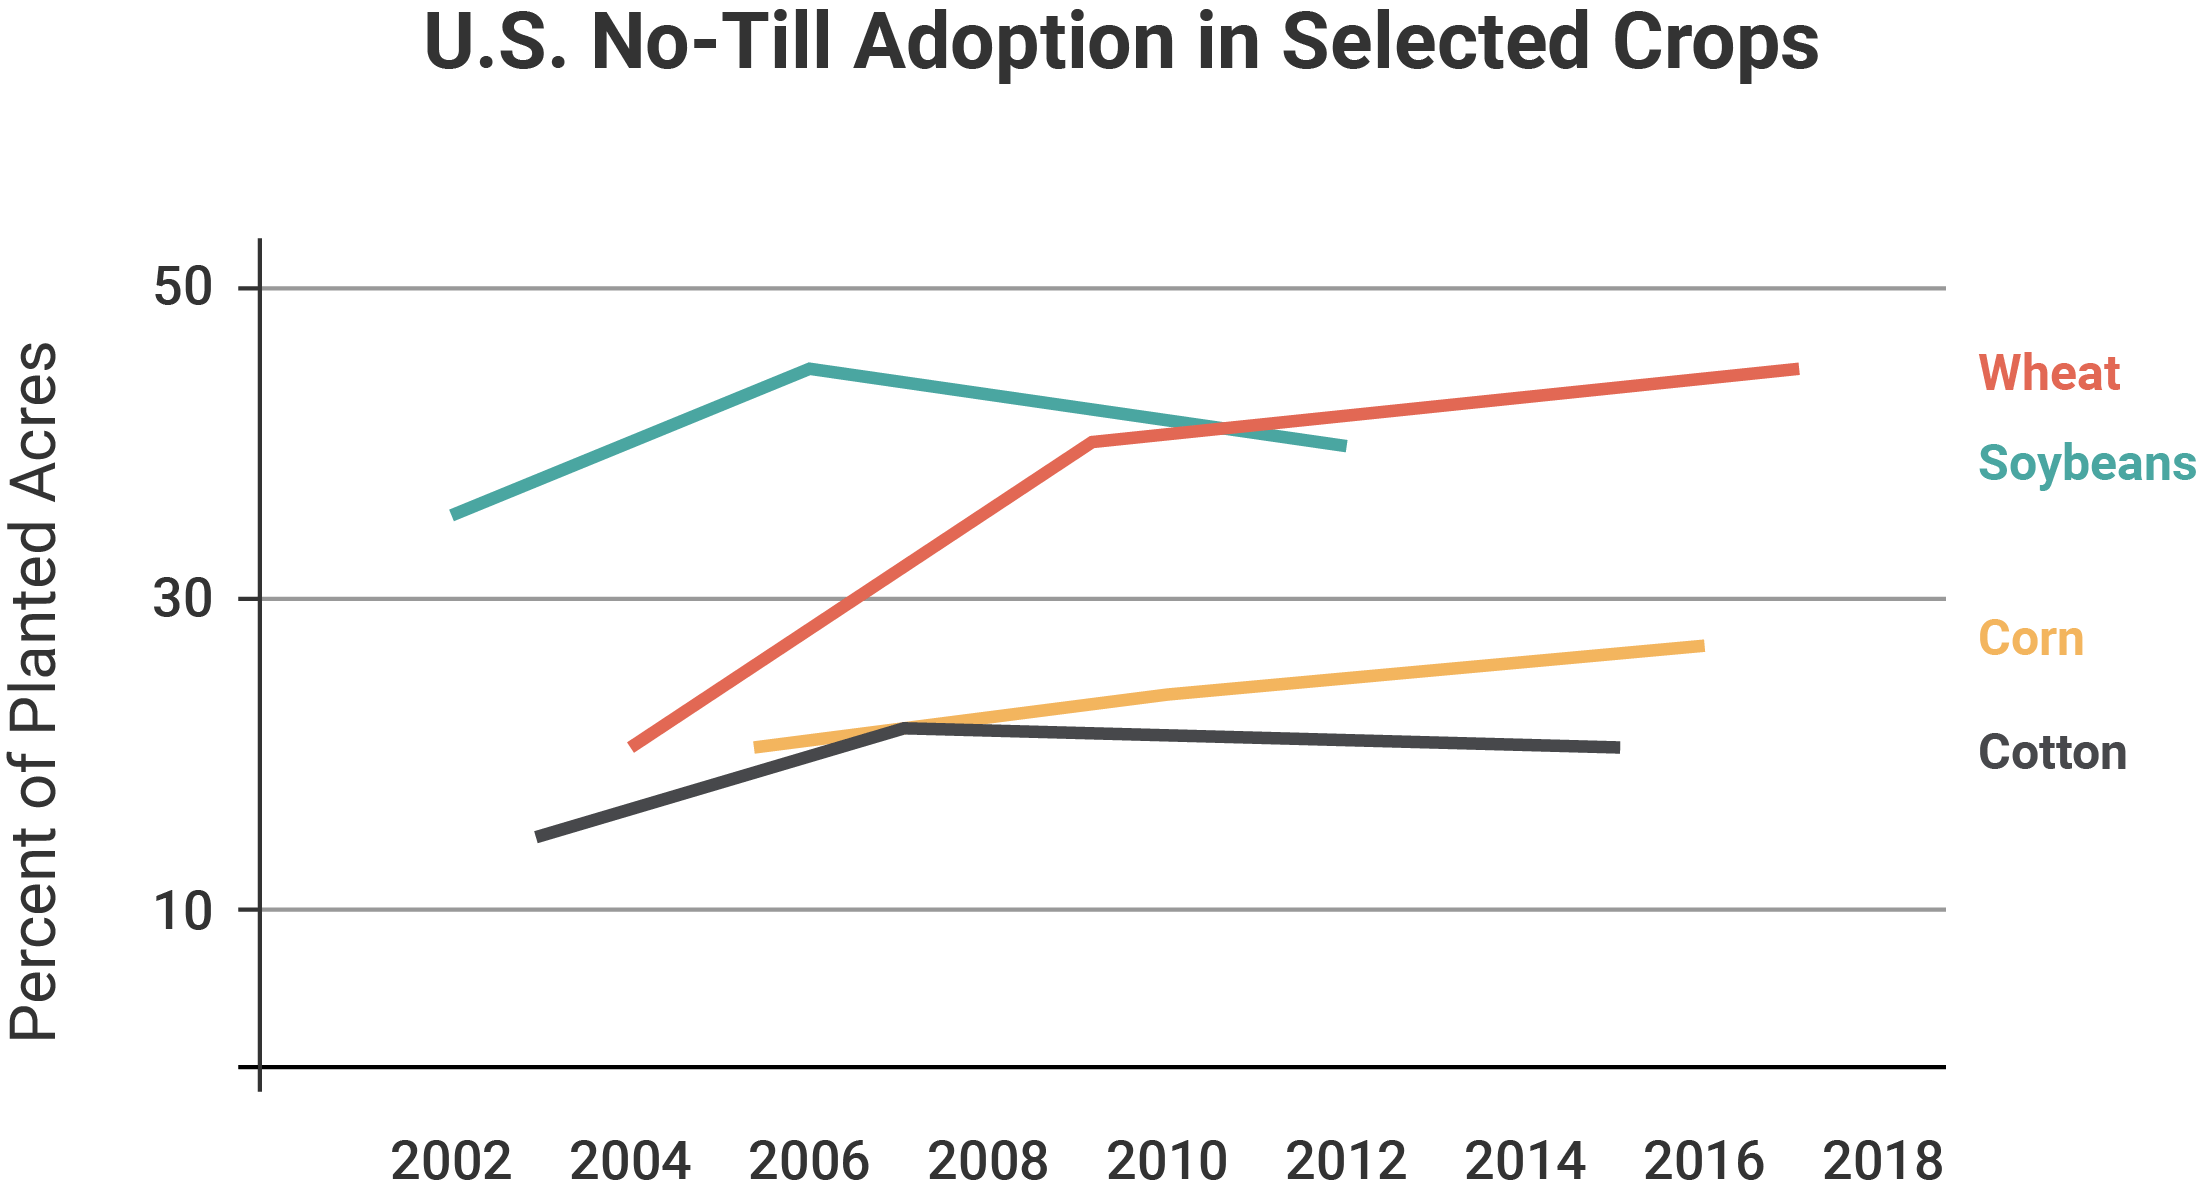 Graph showing no-till adoption in selected crops (wheat, soybeans, corn, and cotton).